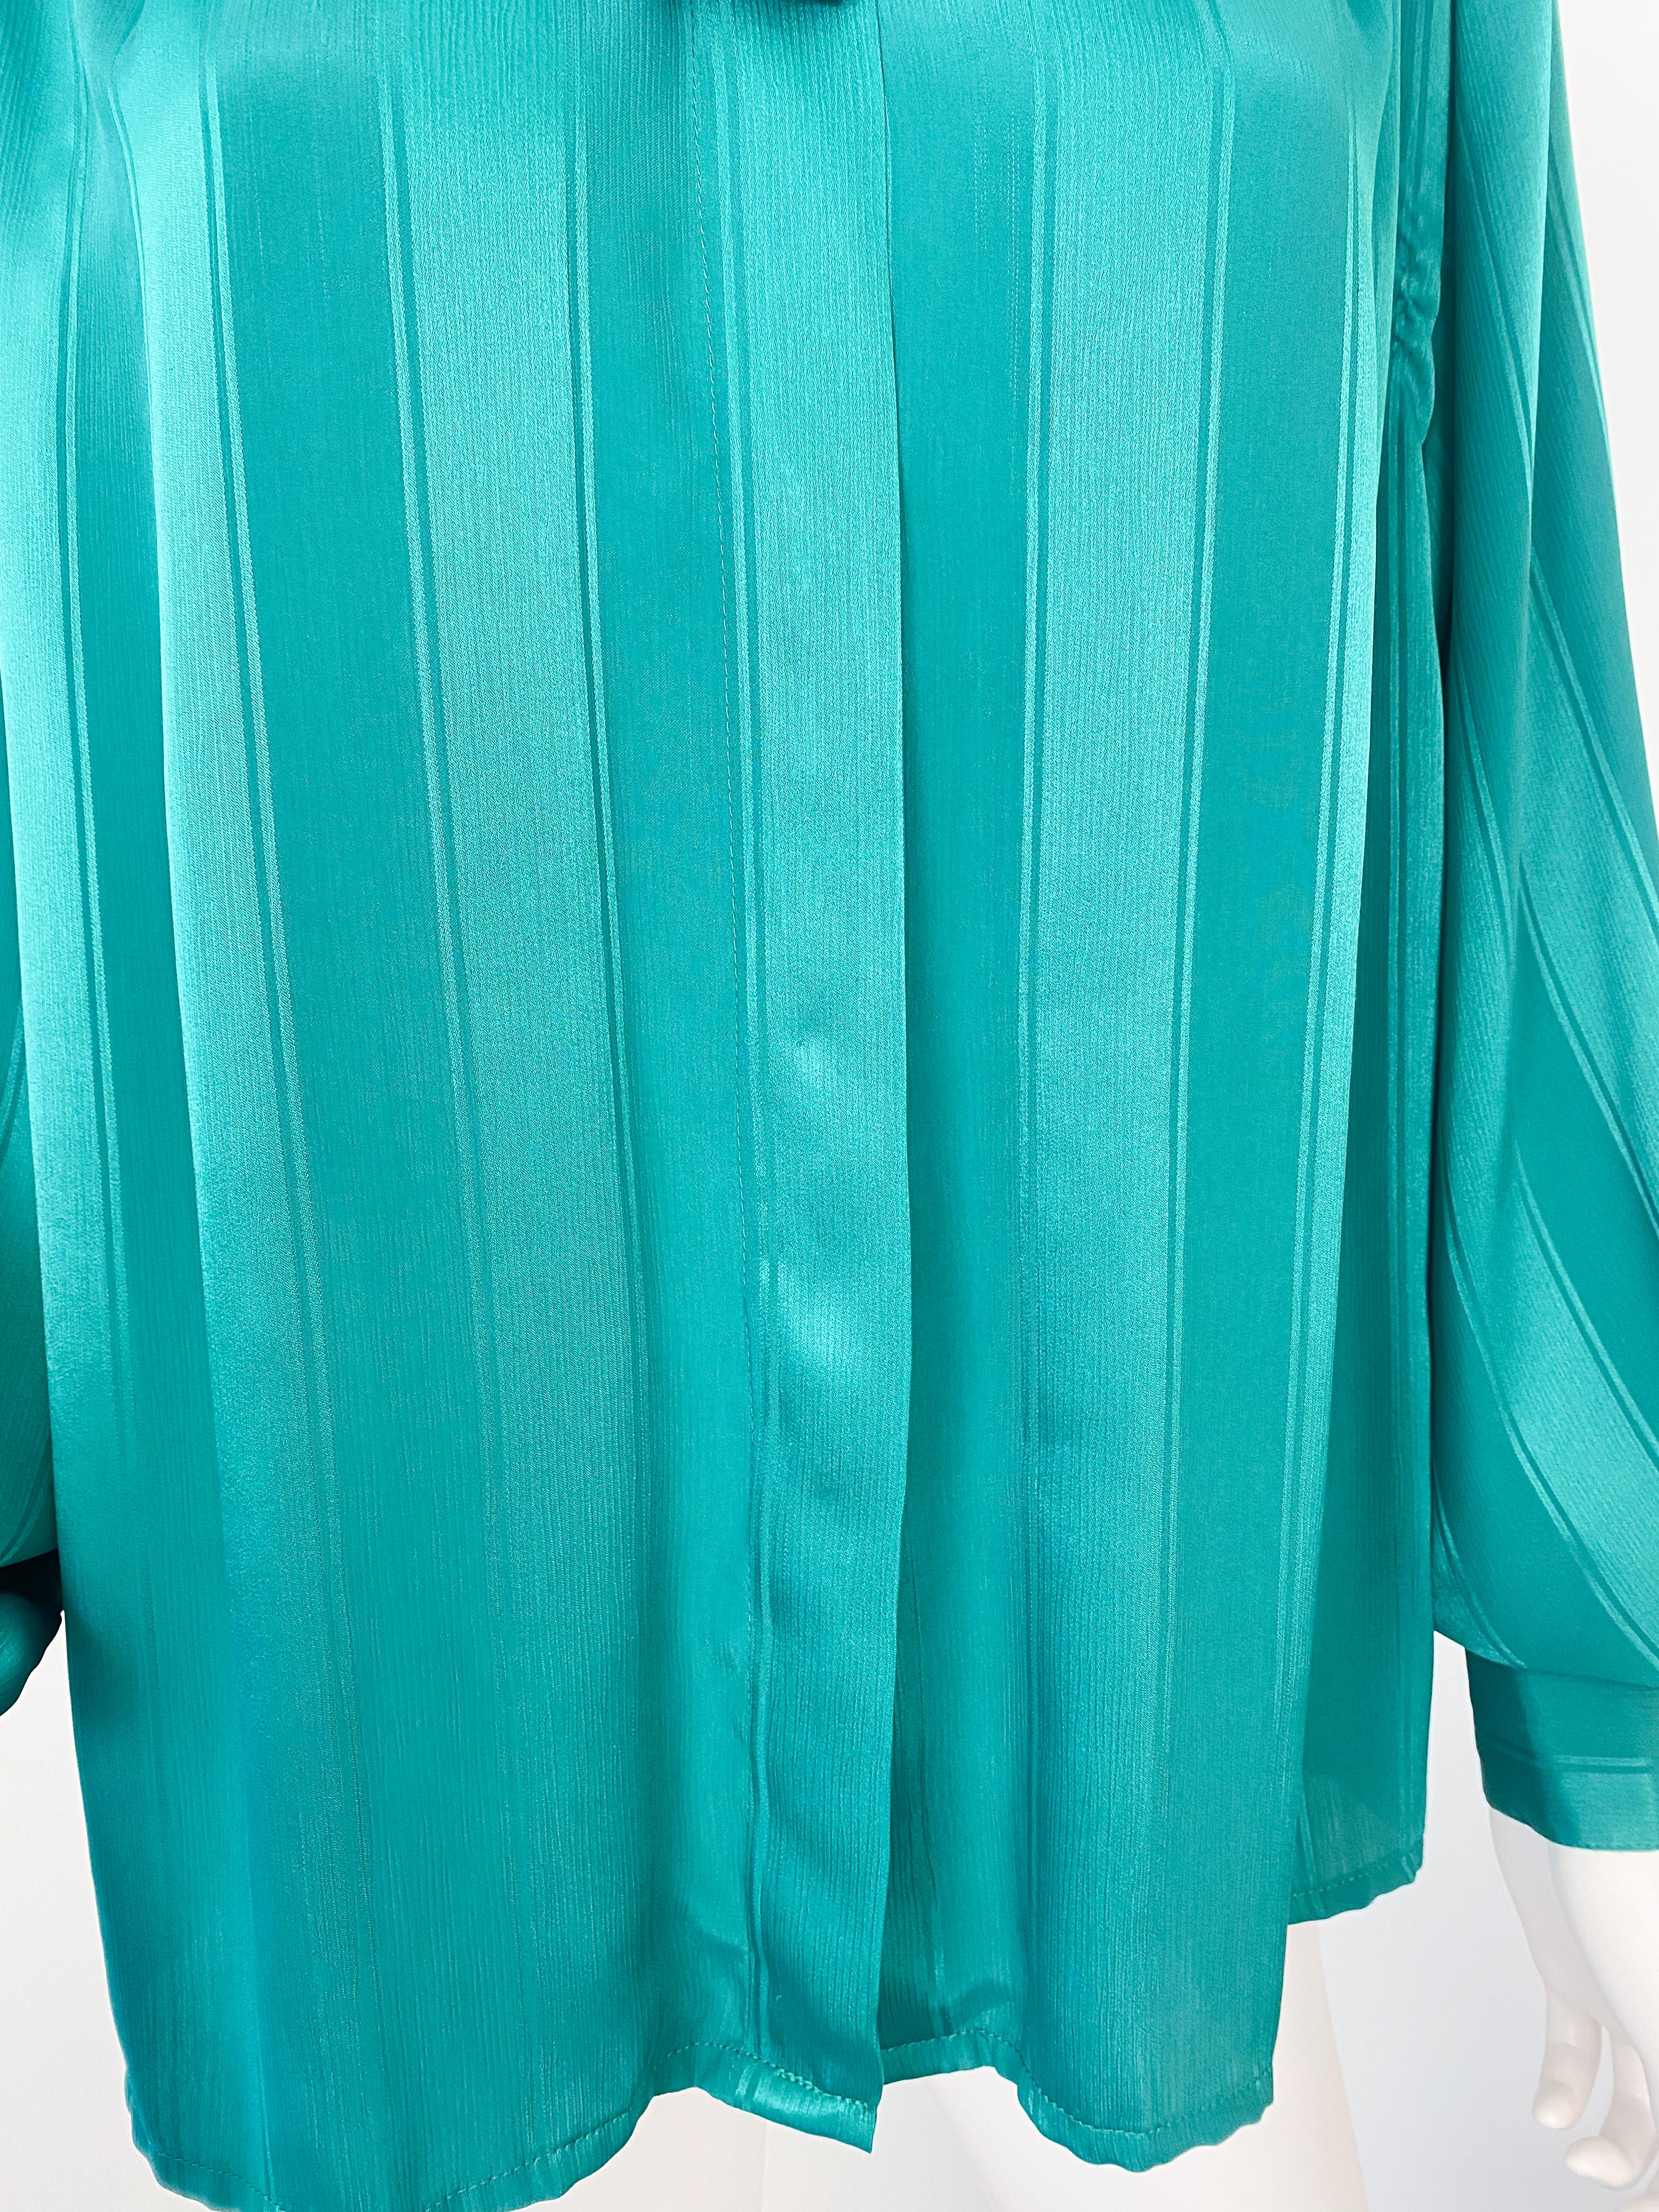 Vintage 1980s Silky Polyester Bow Blouse Top Emerald Green Stripes Size 12/14 For Sale 3